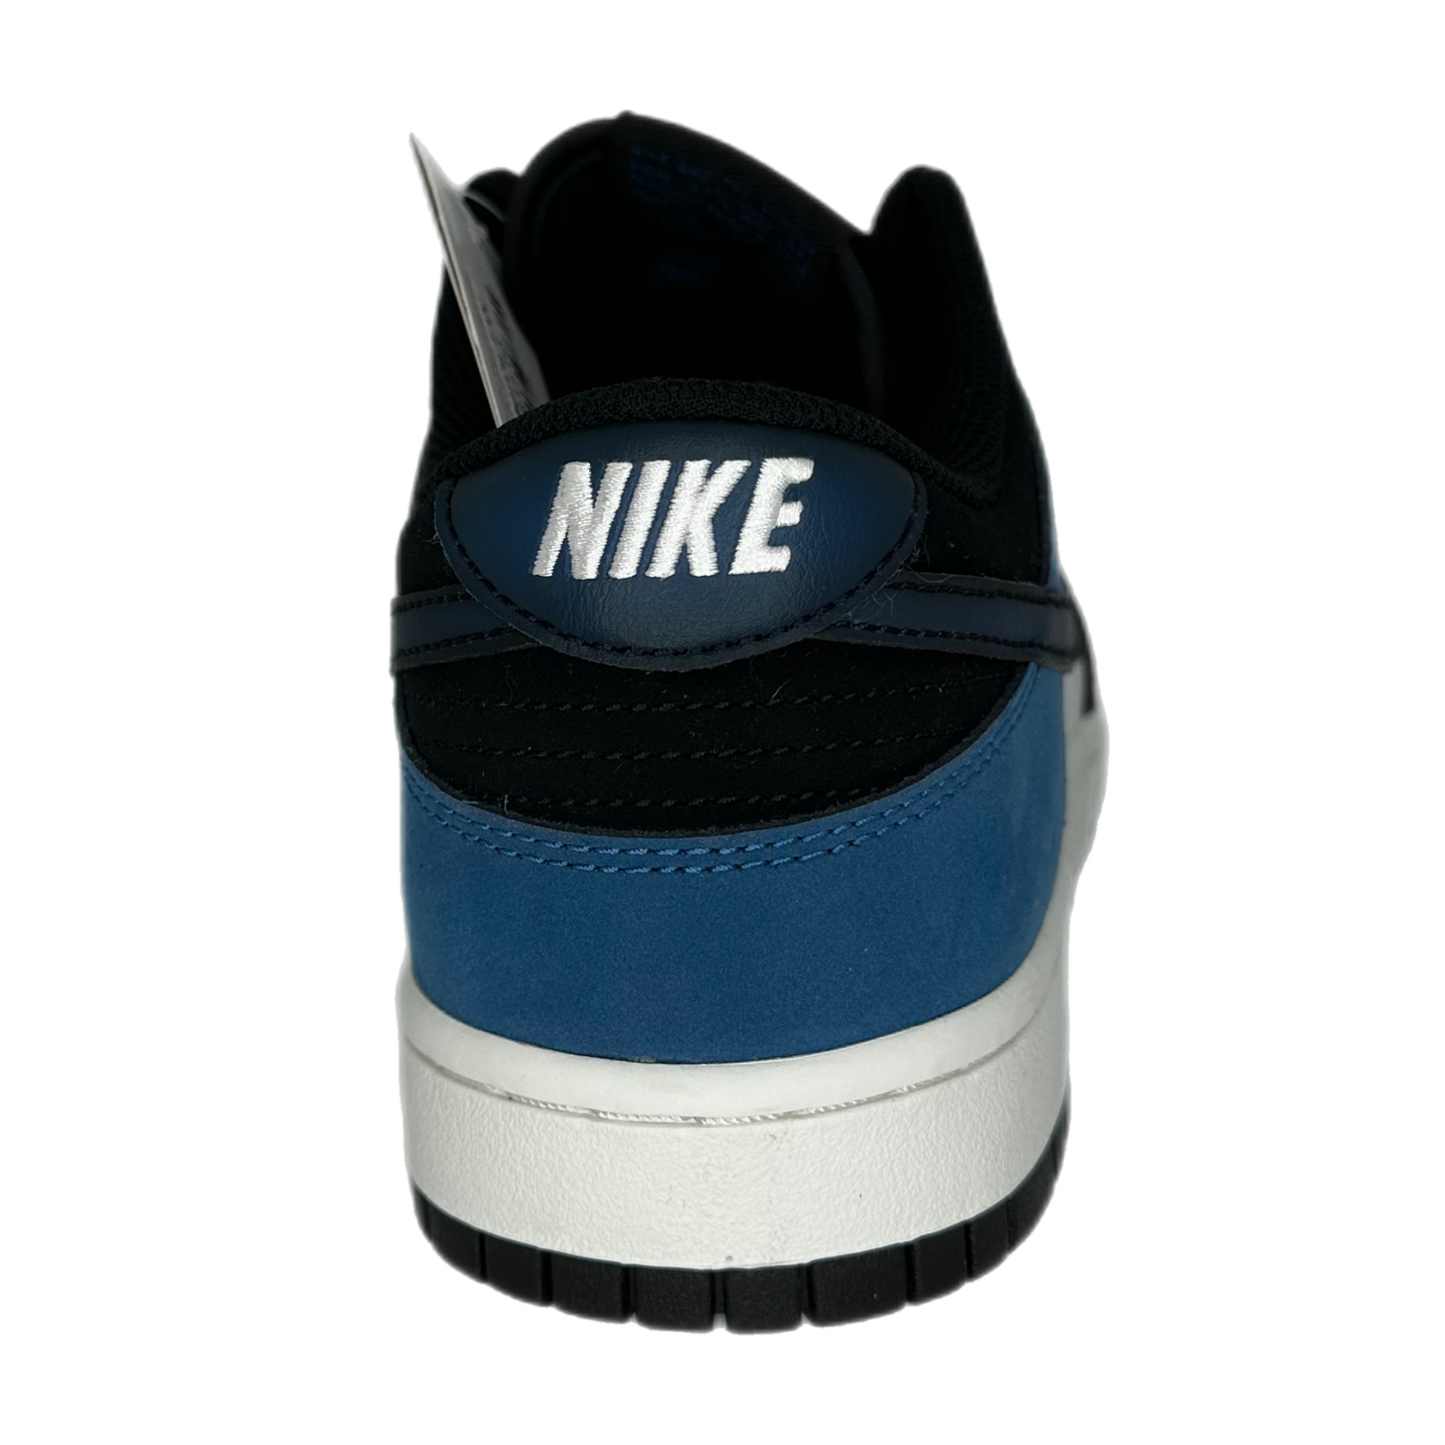 Nike - "Dunk Low Unreleased Sample" -Size 9